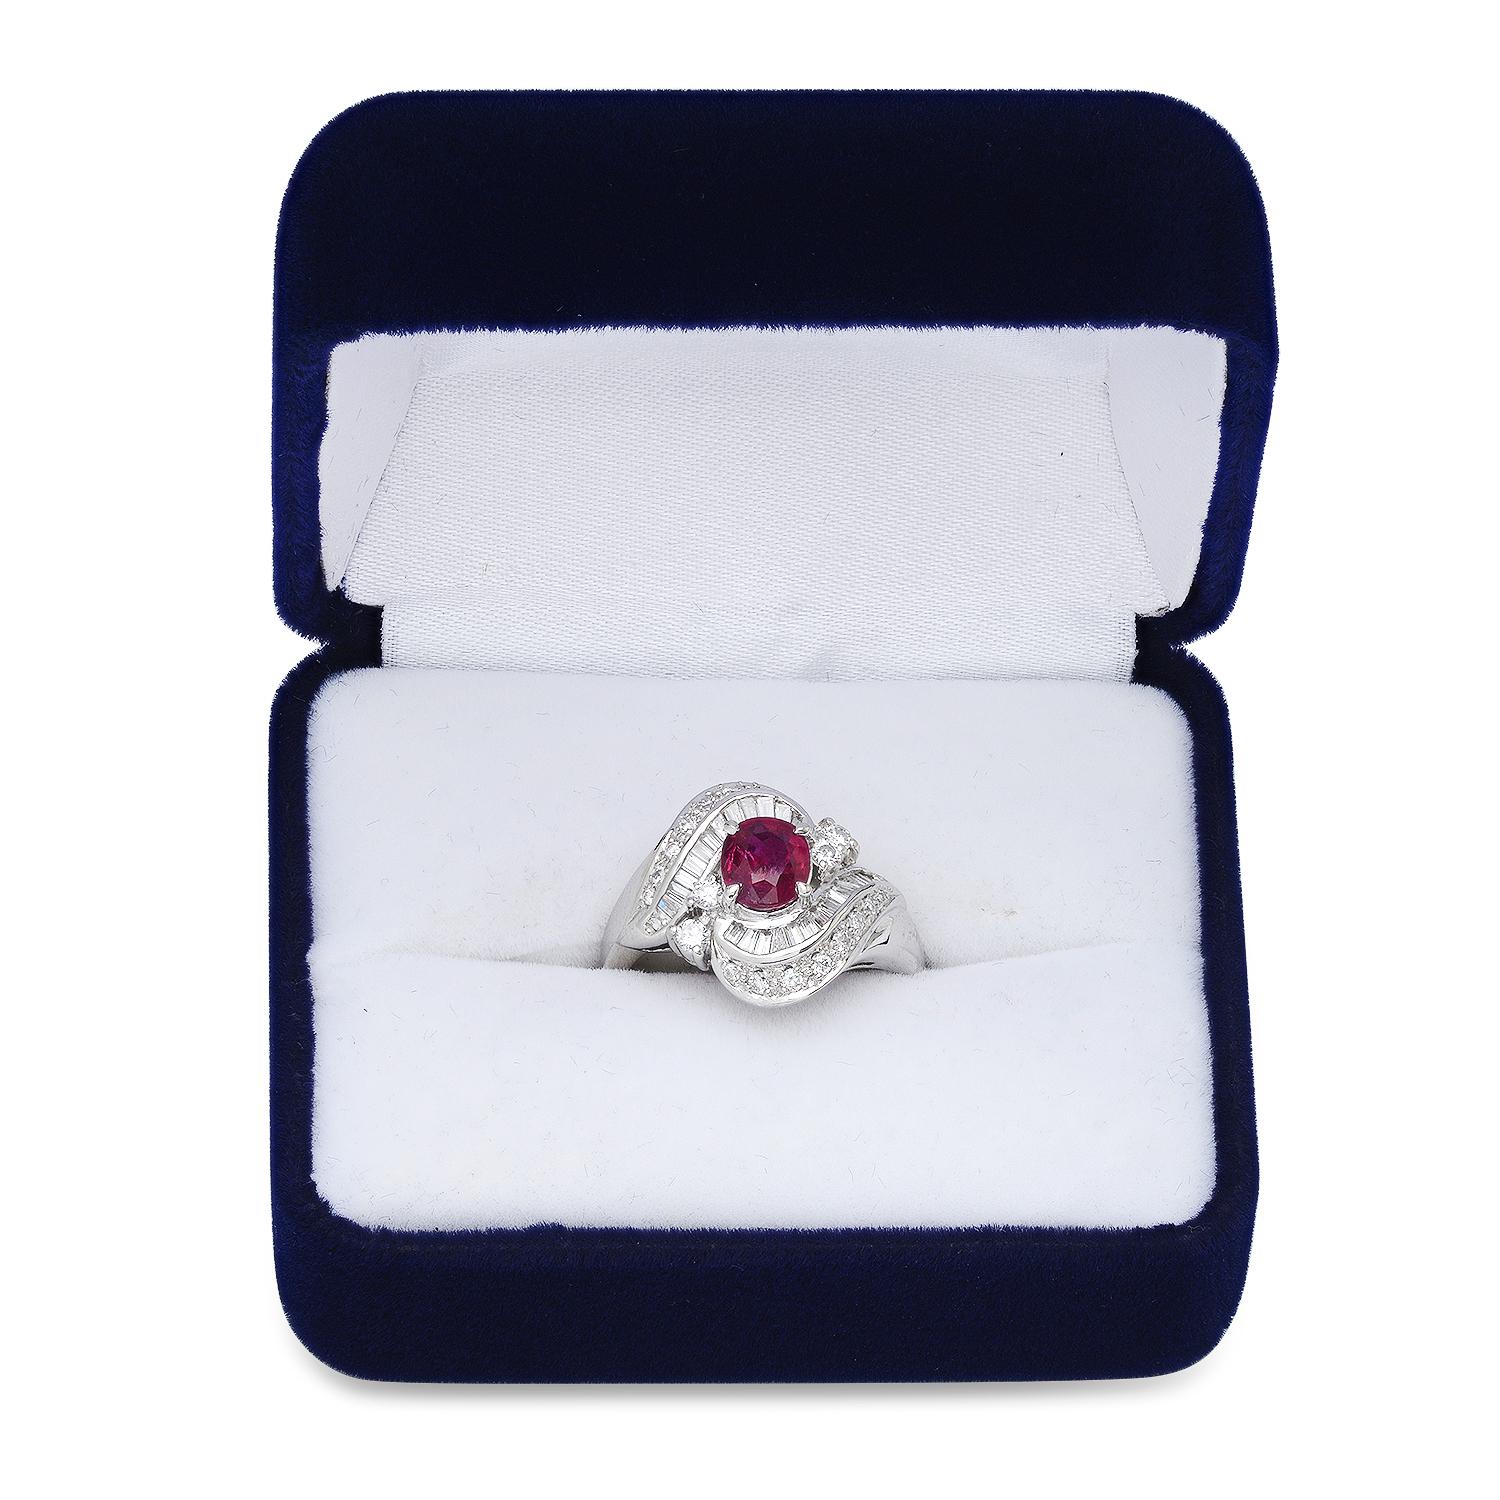 Platinum Setting with 1.40ct Ruby and 0.87ct Diamond Ladies Ring